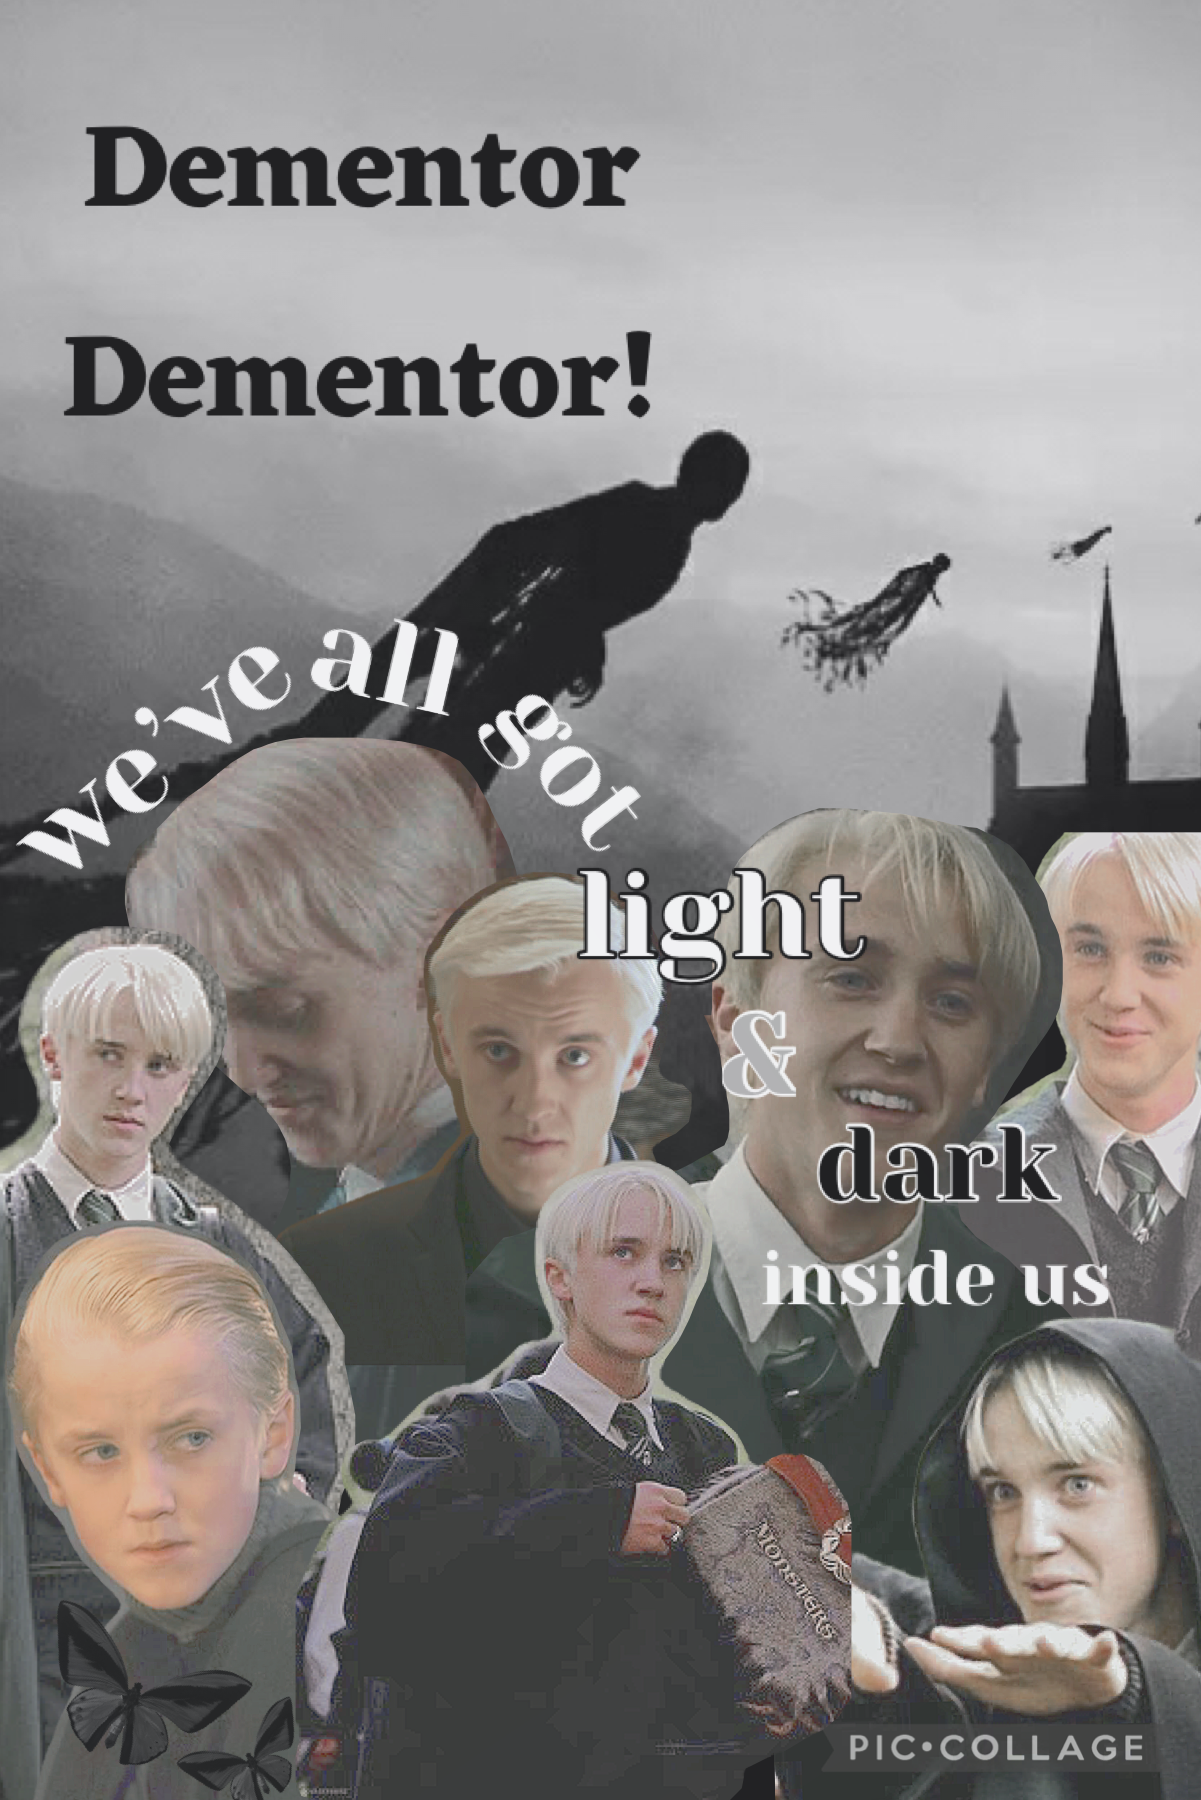 tap

sorry it’s more draco😂i’m not obsessed it’s just soooo easy to make sad or aesthetic collages with him lol